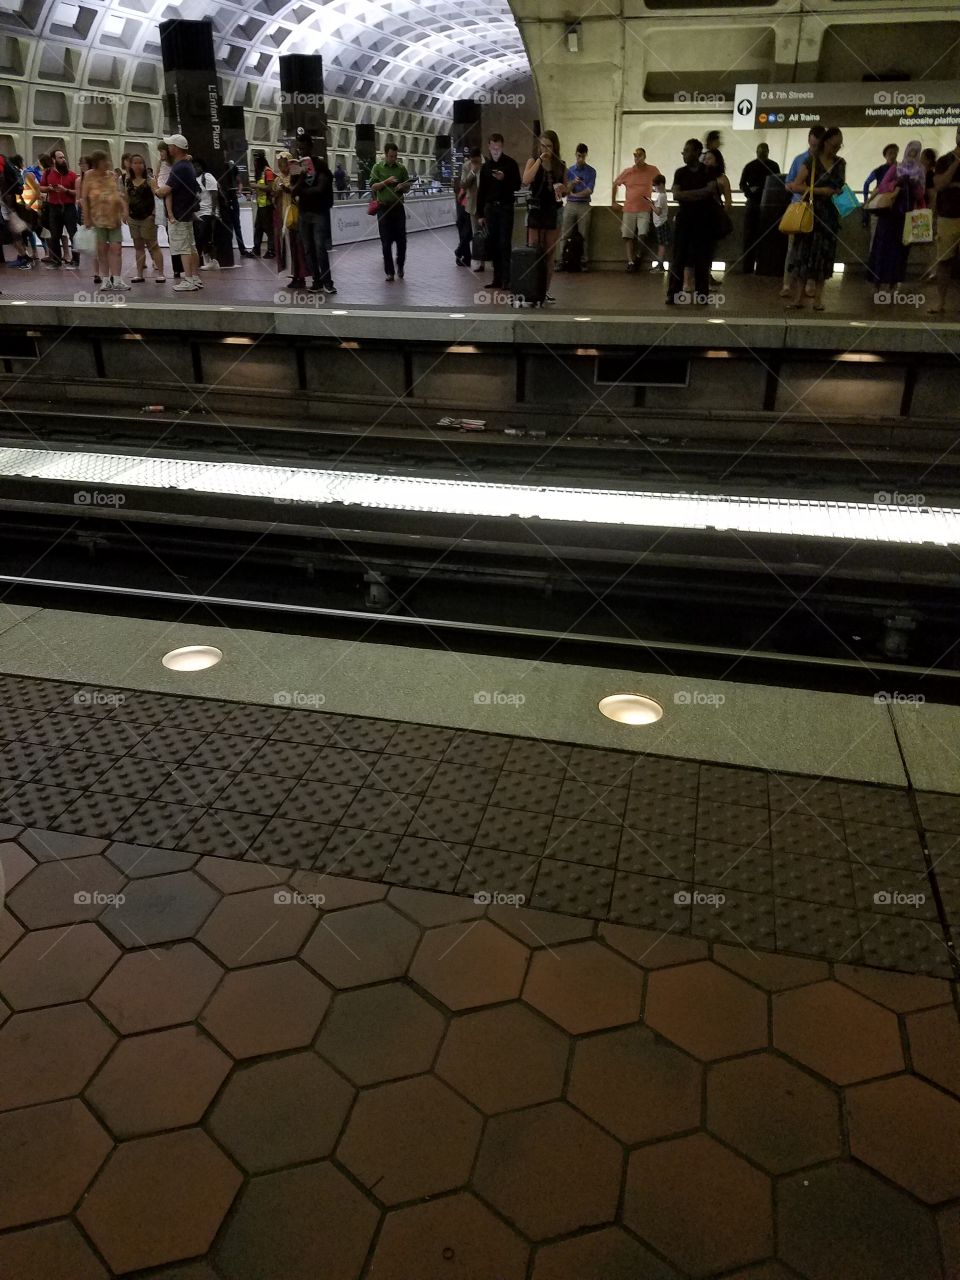 Waiting for the Metro train